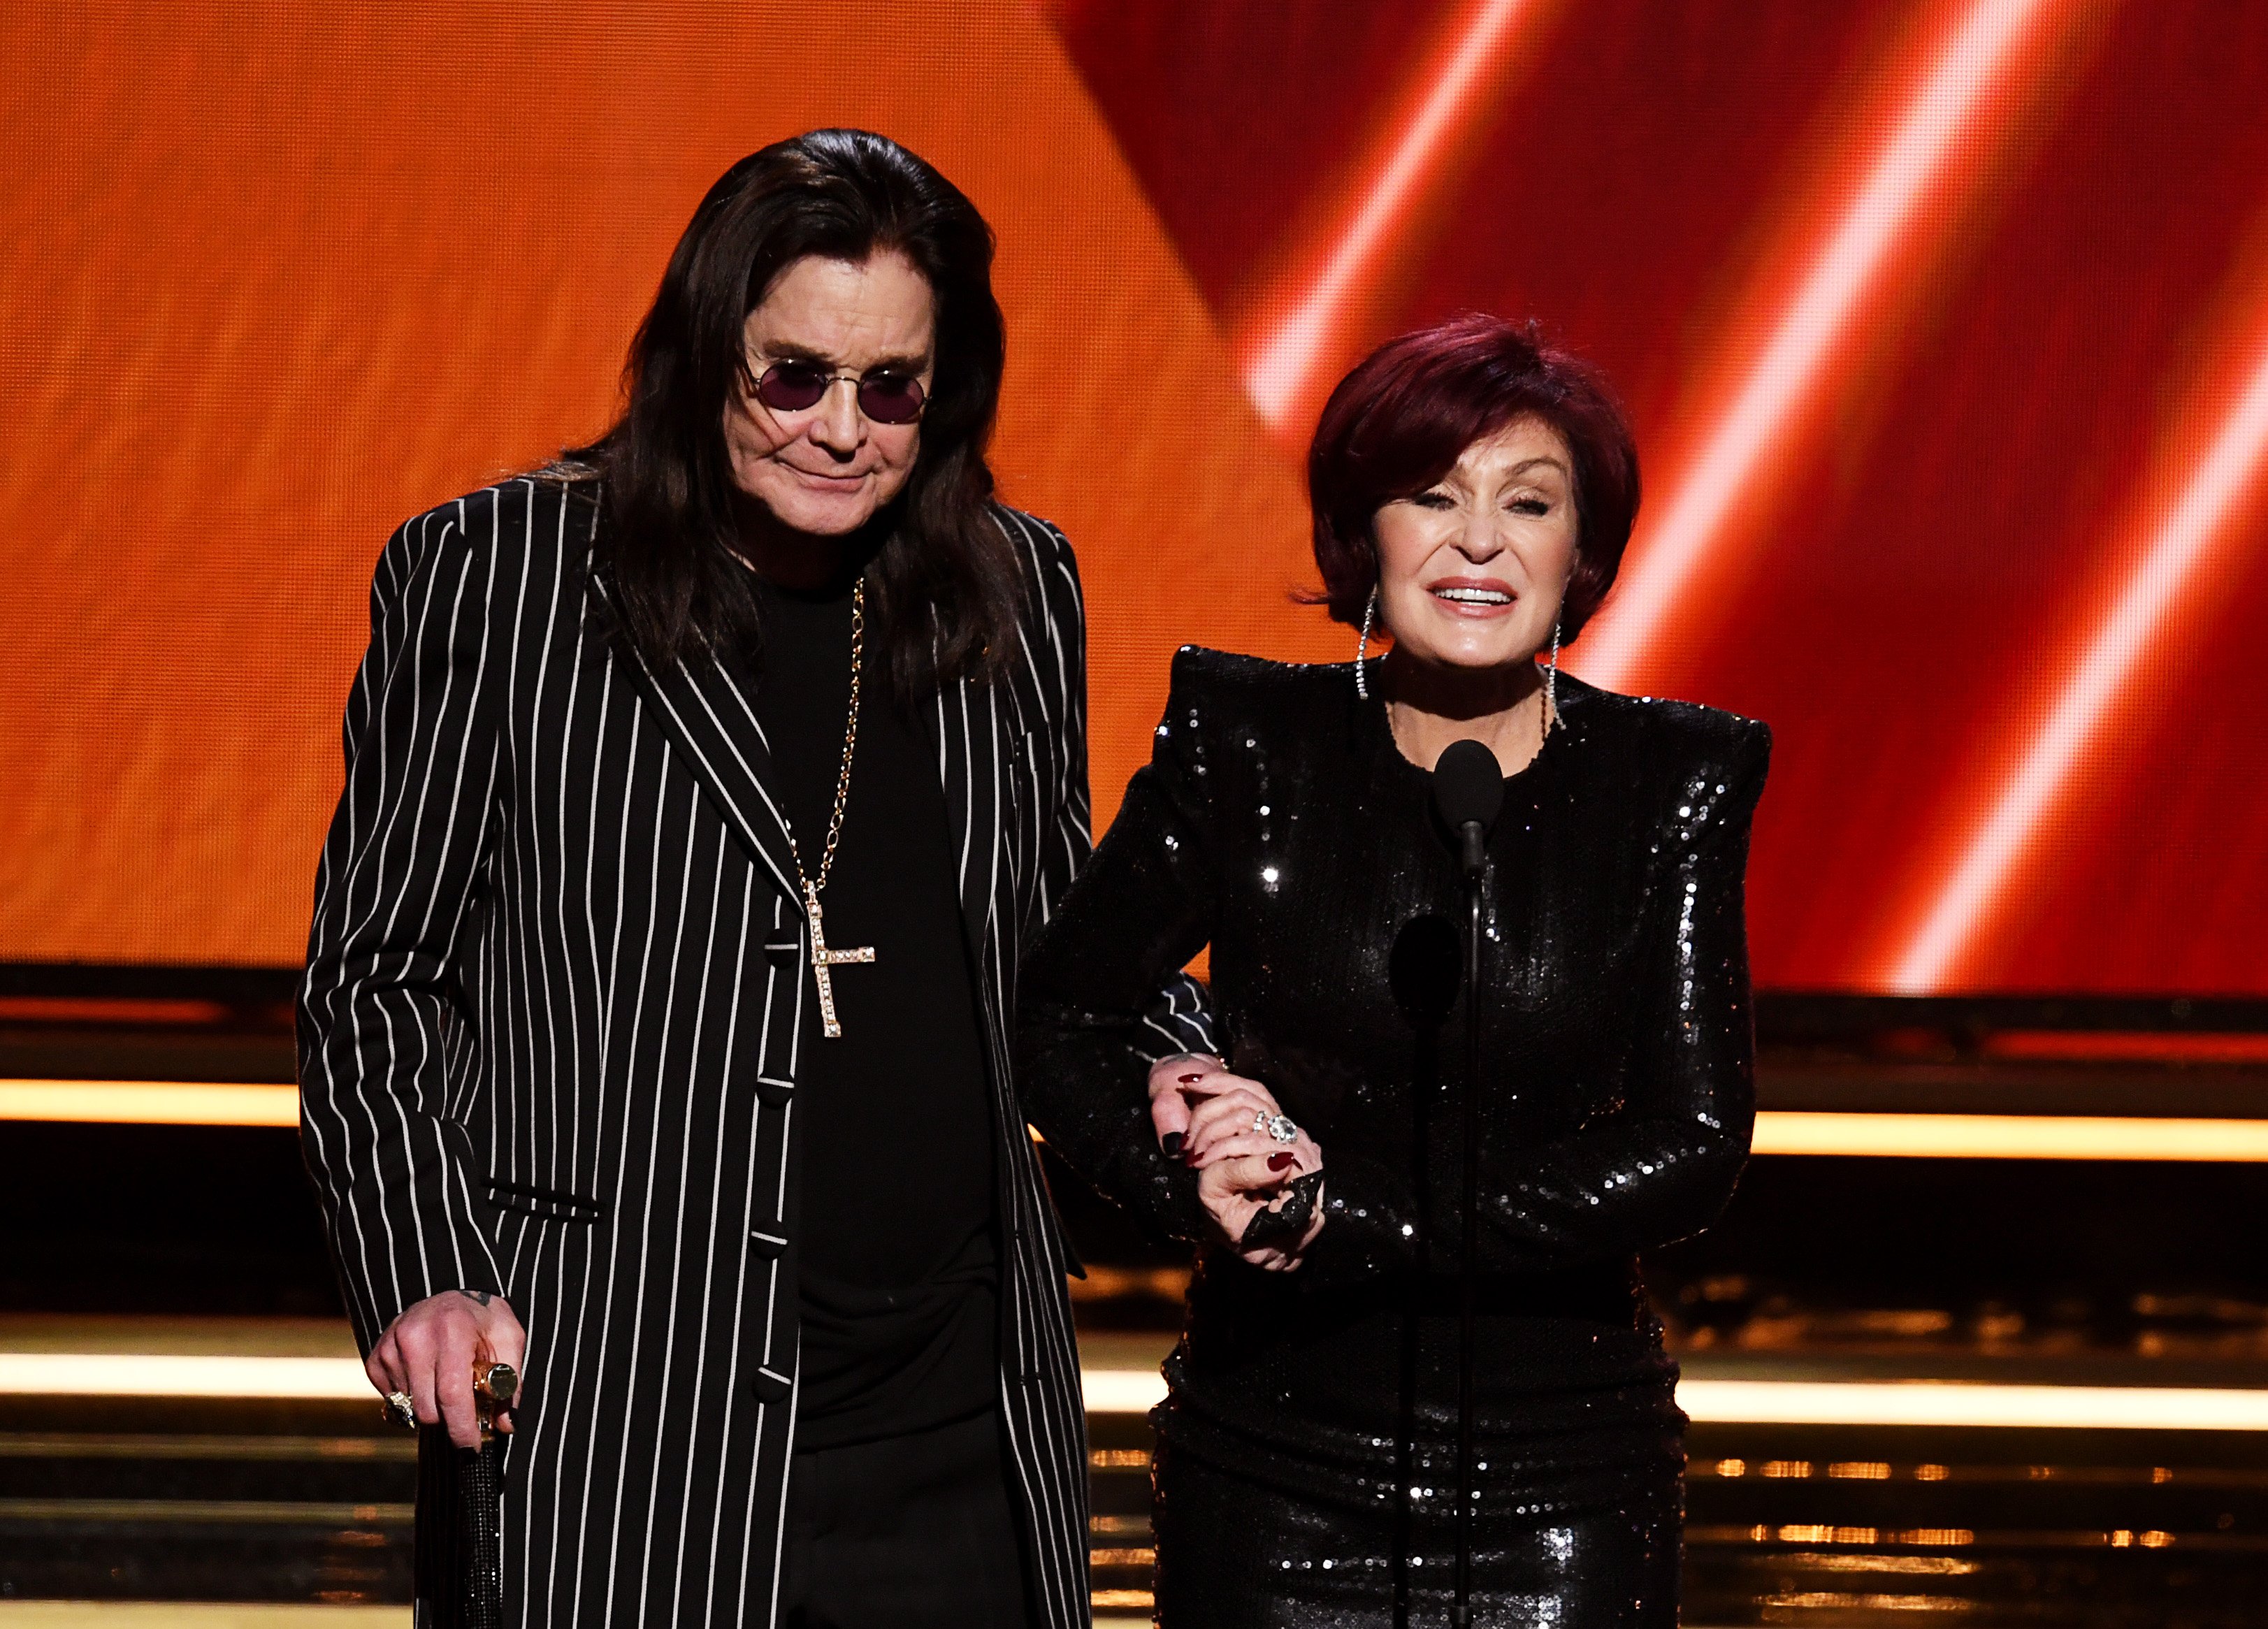 Ozzy Osbourne and Sharon Osbourne at the 62nd Annual Grammy Awards January 26, 2020, in California. | Source: Getty Images